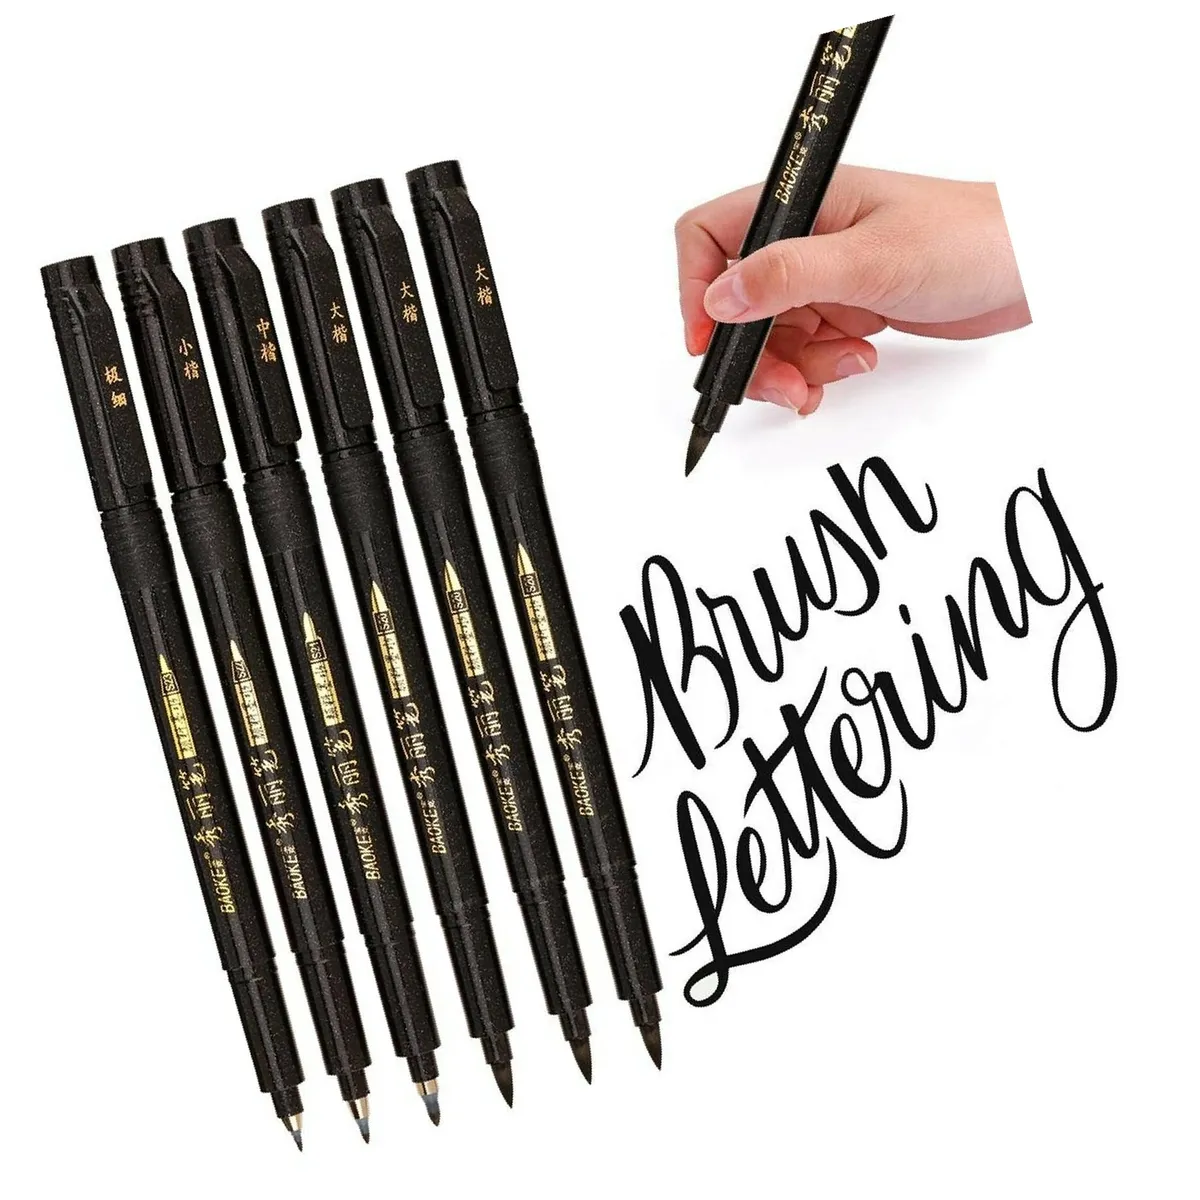 Misulove Hand Lettering Pens, Calligraphy Pens, Brush Markers Set, Soft and Hard Tip, Black Ink Refillable - 4 Size(6 Pack) for Beginners Writing, Art